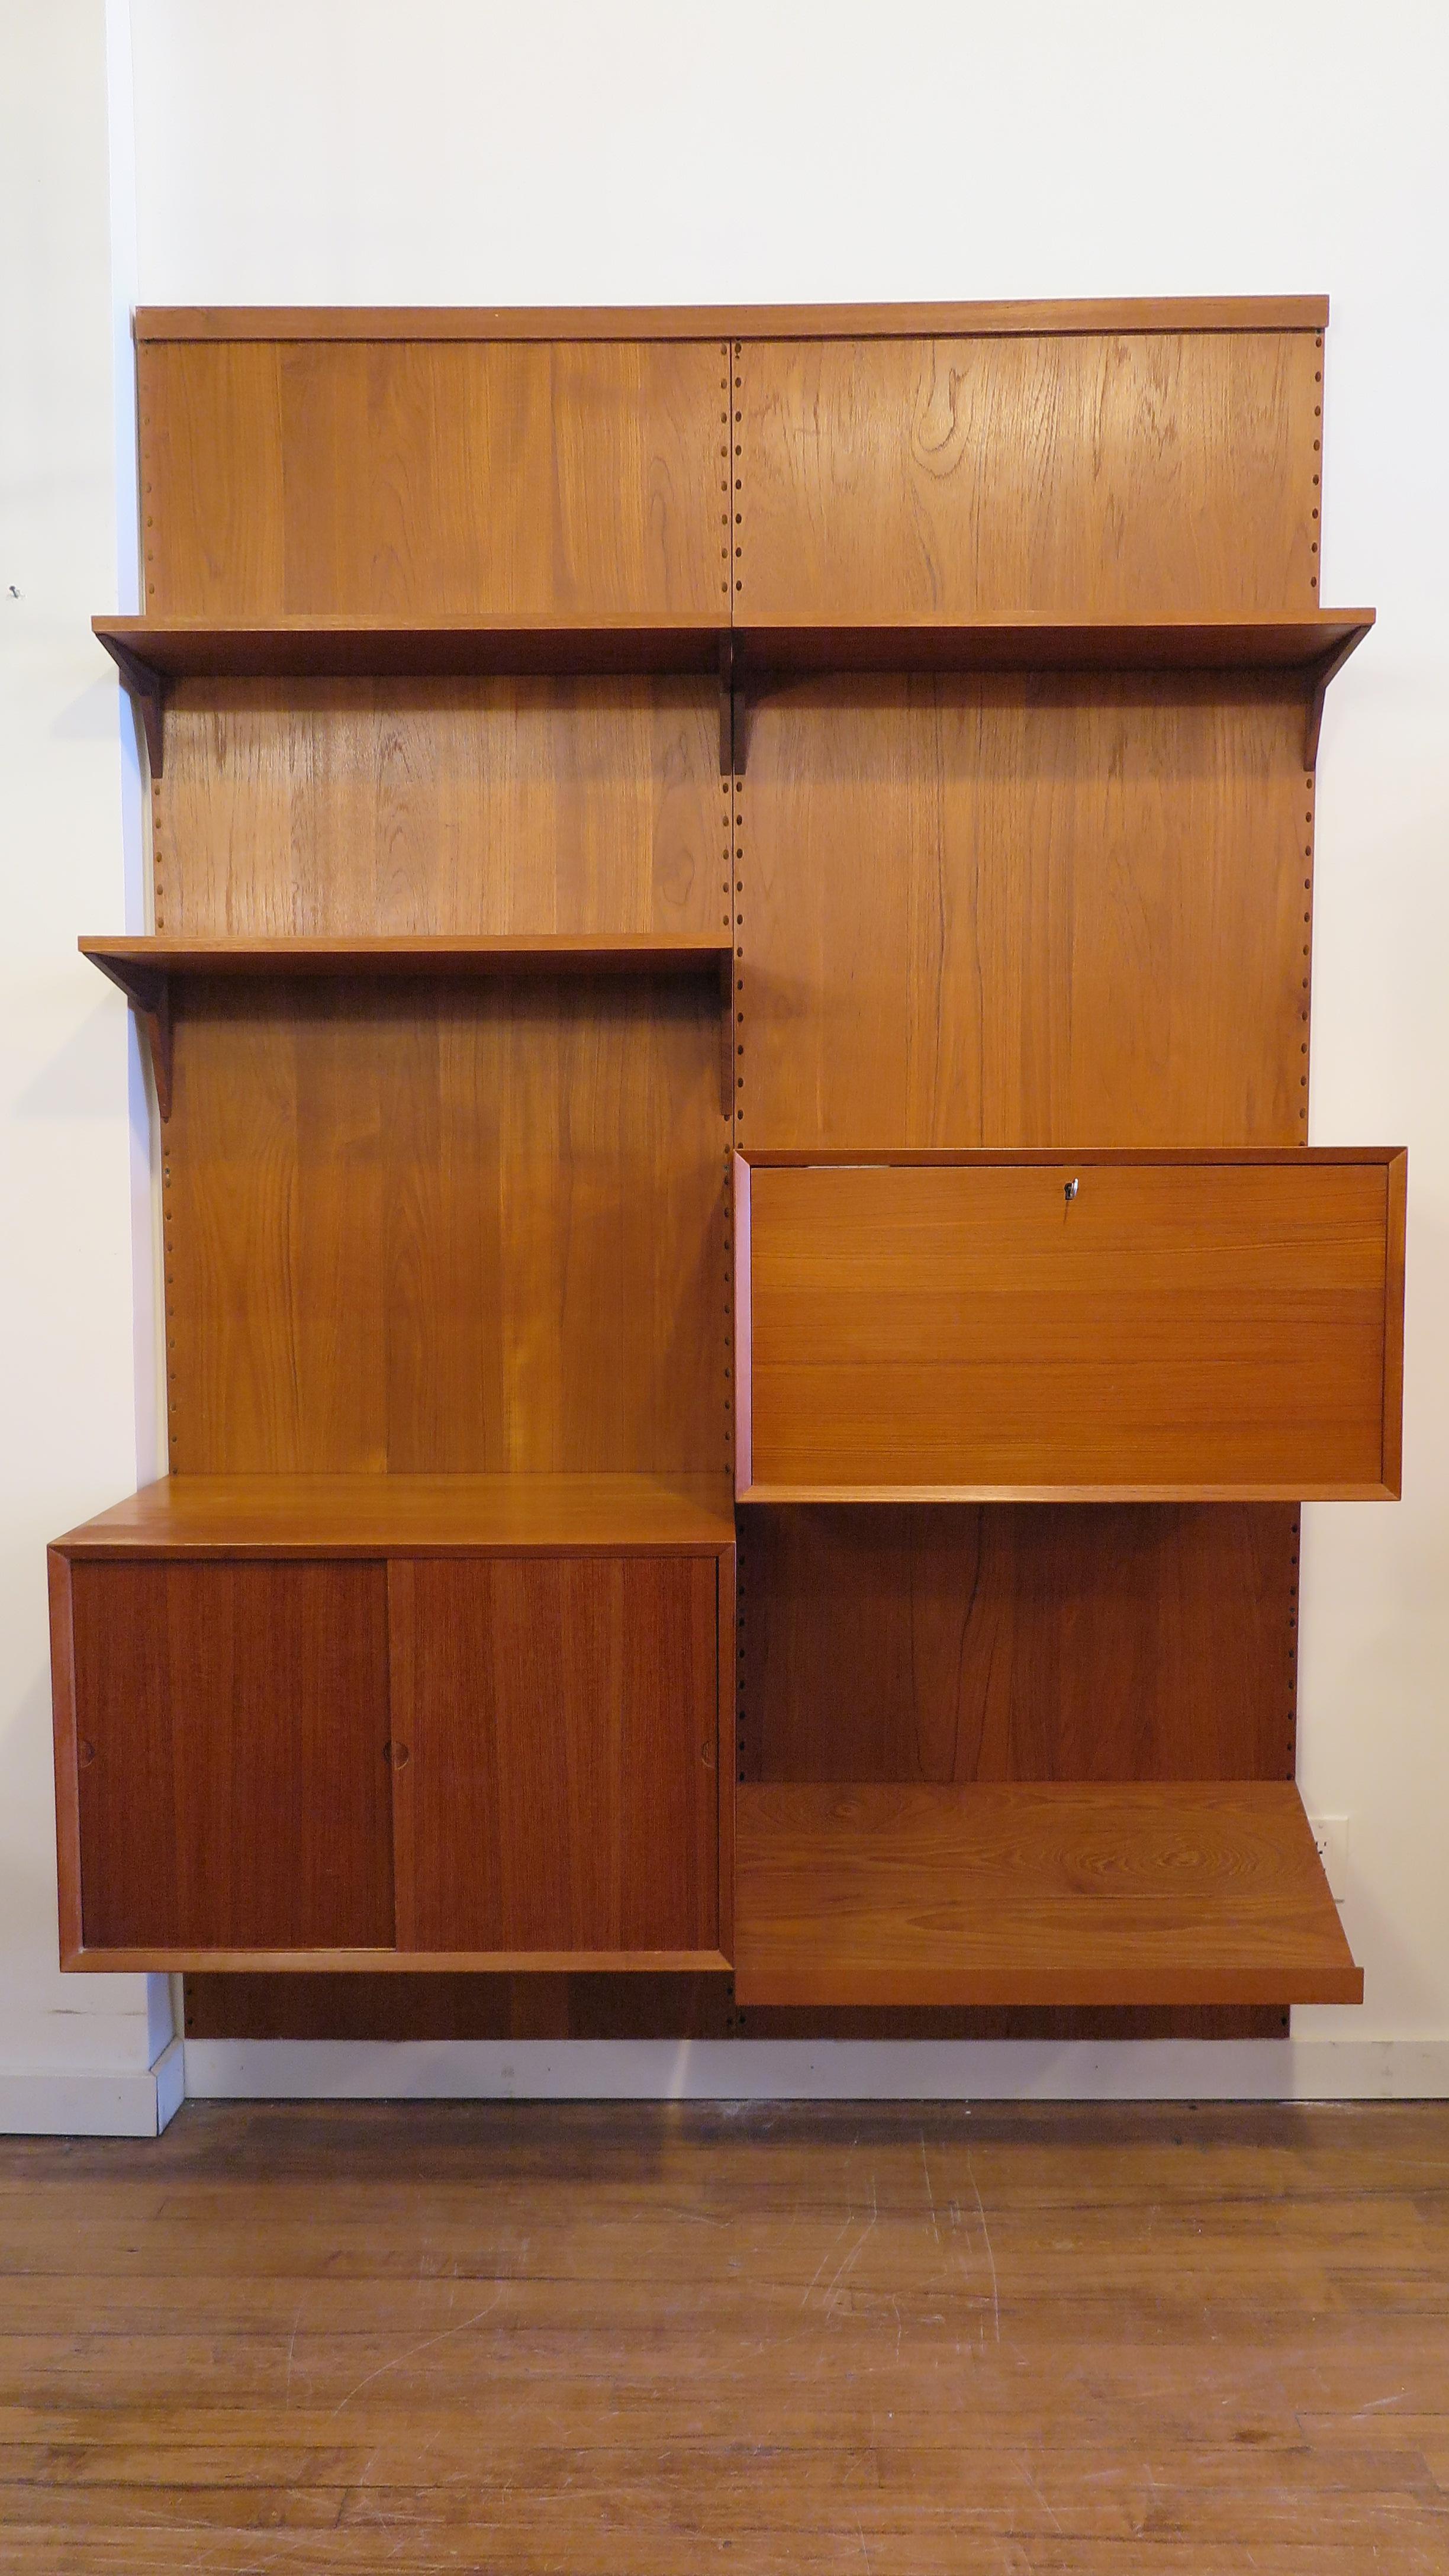 Poul Cadovius Royal Systems wall unit for Cado. Two Teak panels with adjustable shelves, cabinet, dry bar, and magazine rack. Three book - display shelfs, a cabinet having two adjustable height drawers, a dry bar cabinet with mirrored back, single